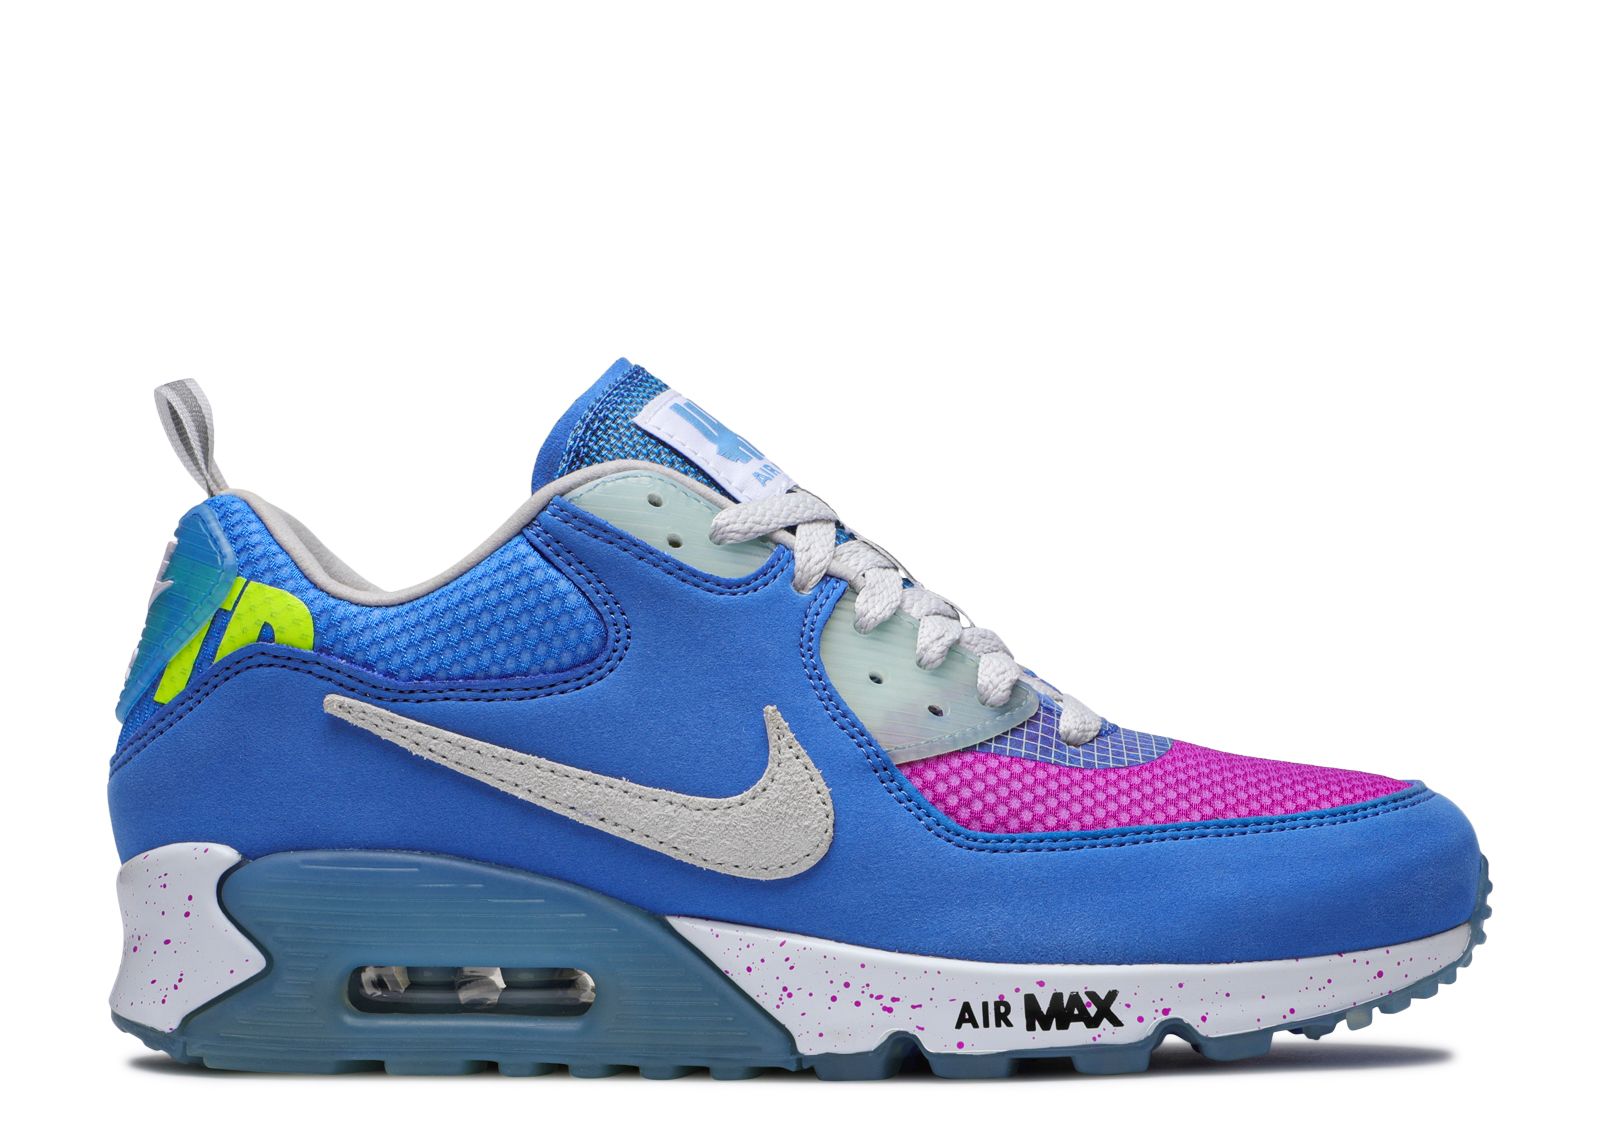 Undefeated X Air Max 90 'Pacific Blue' - Nike - CQ2289 400 